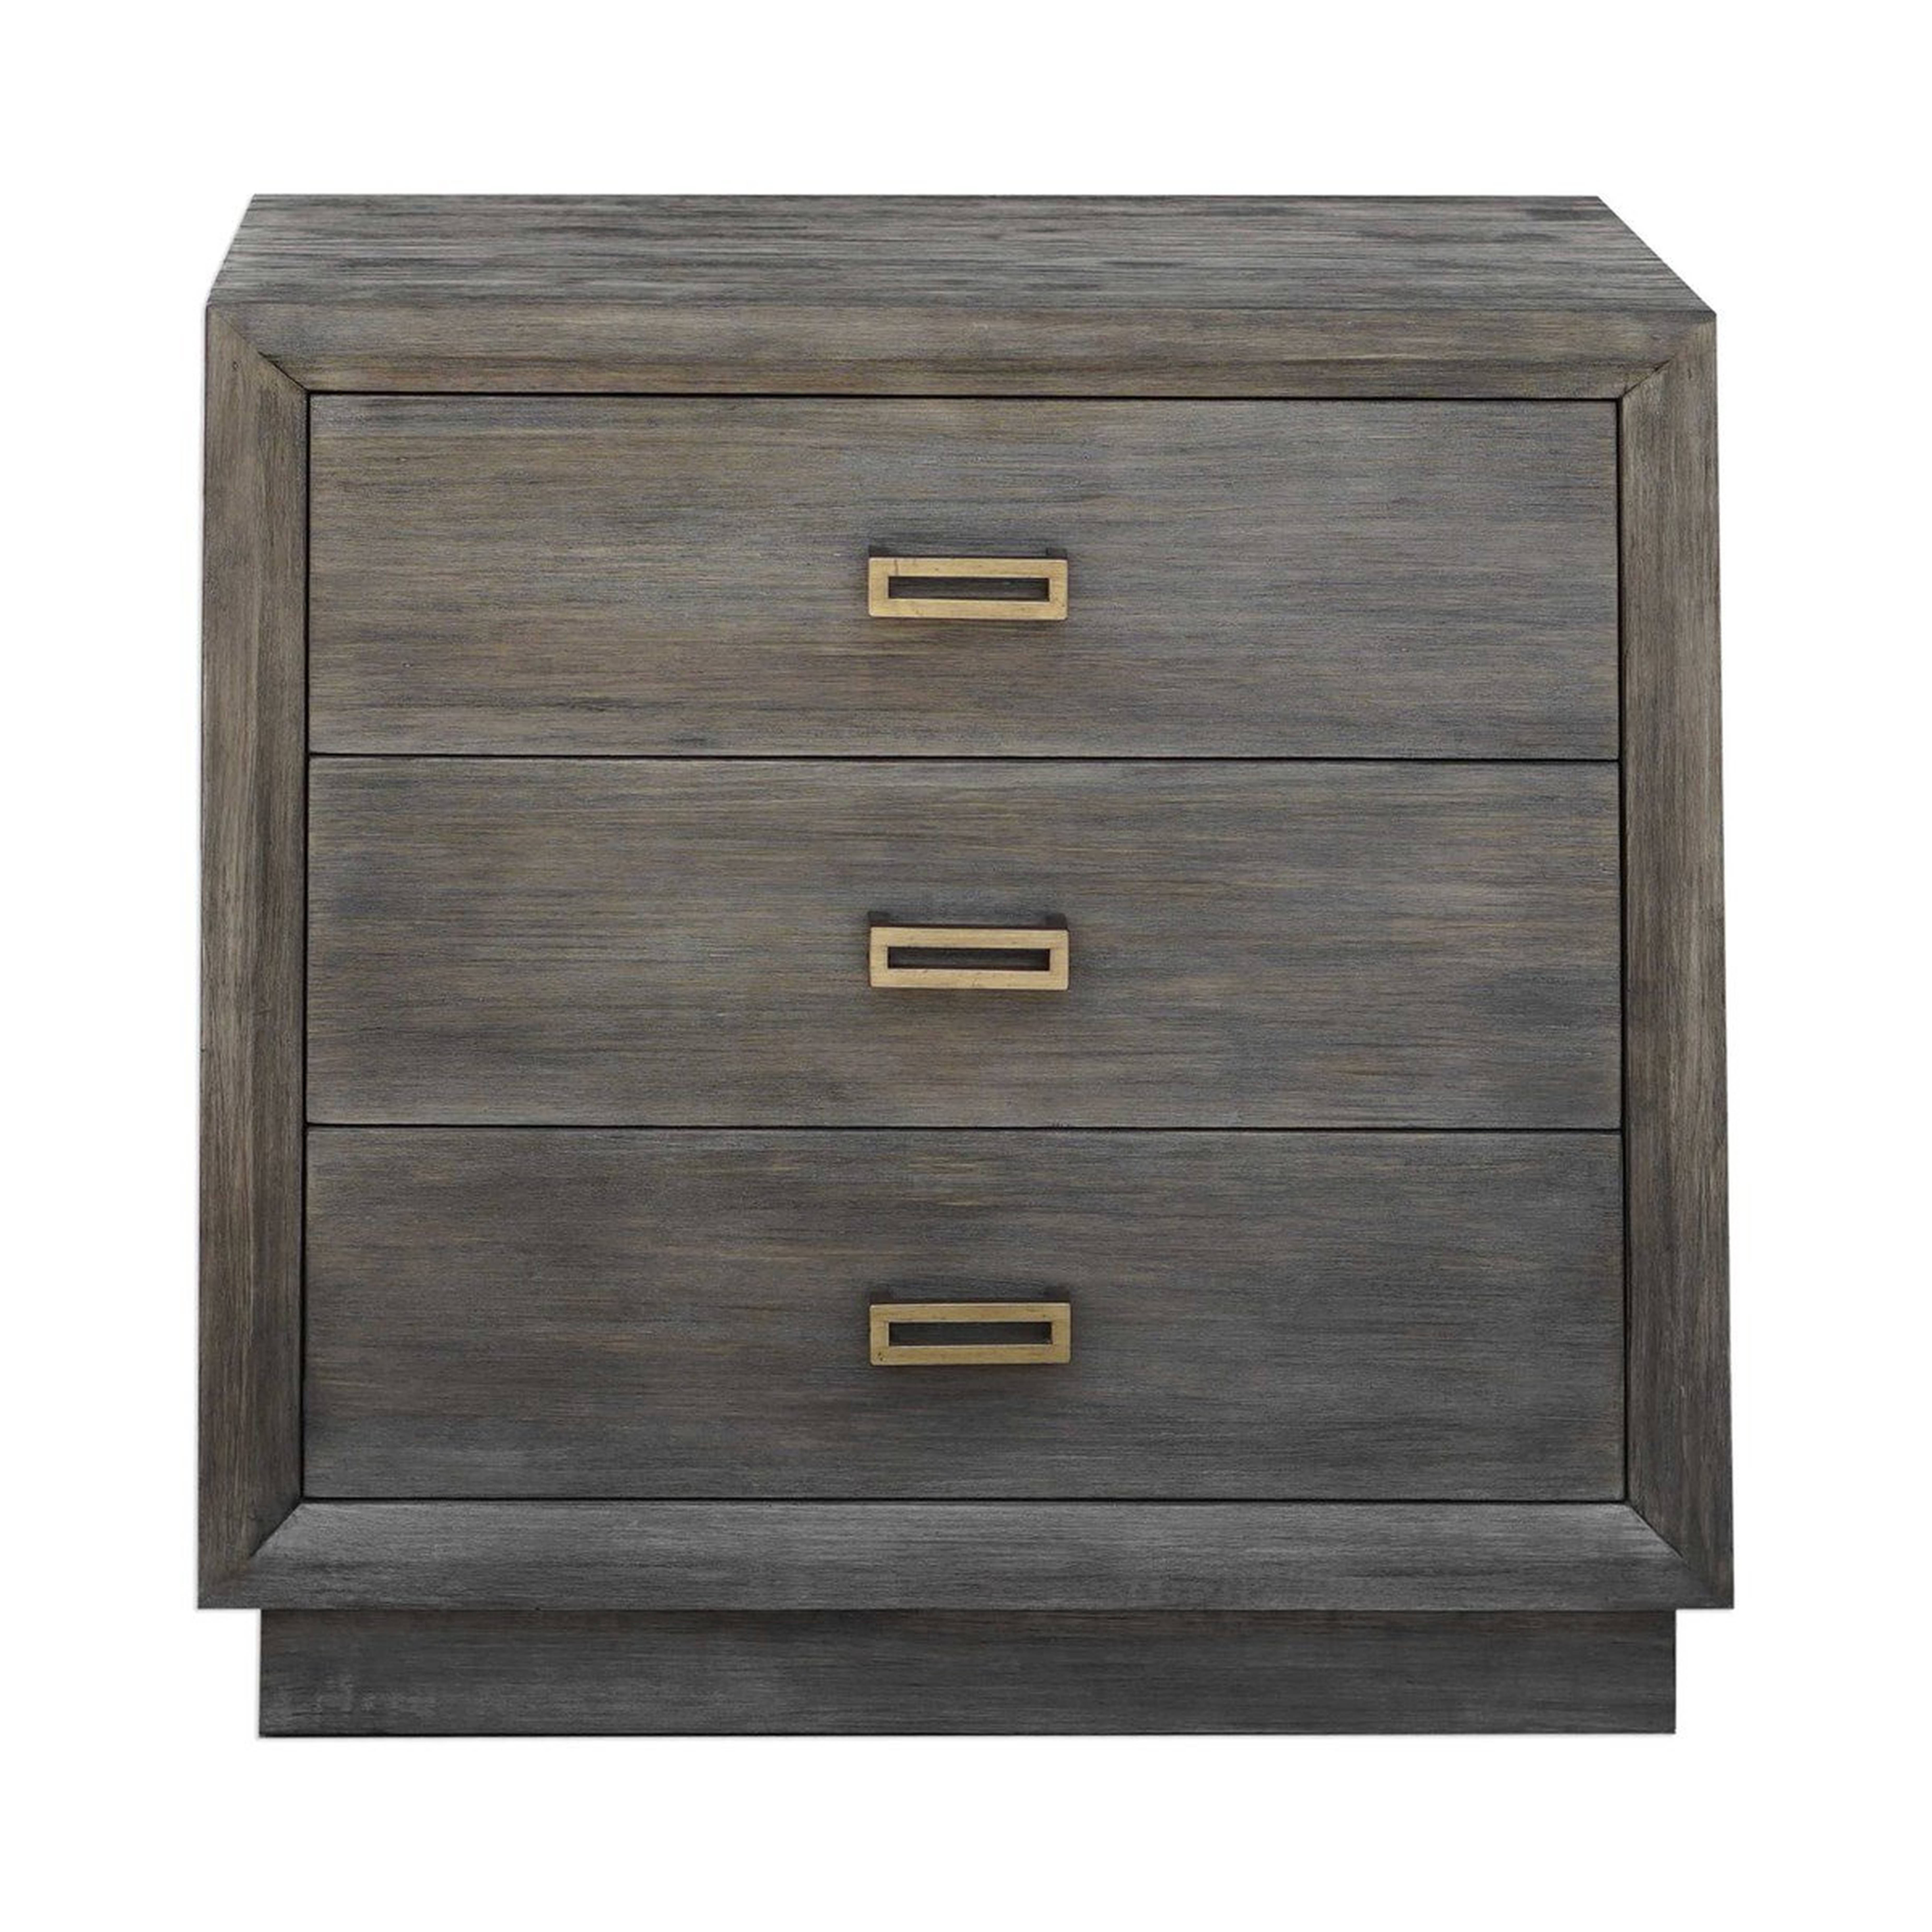 THERON ACCENT CHEST - Hudsonhill Foundry